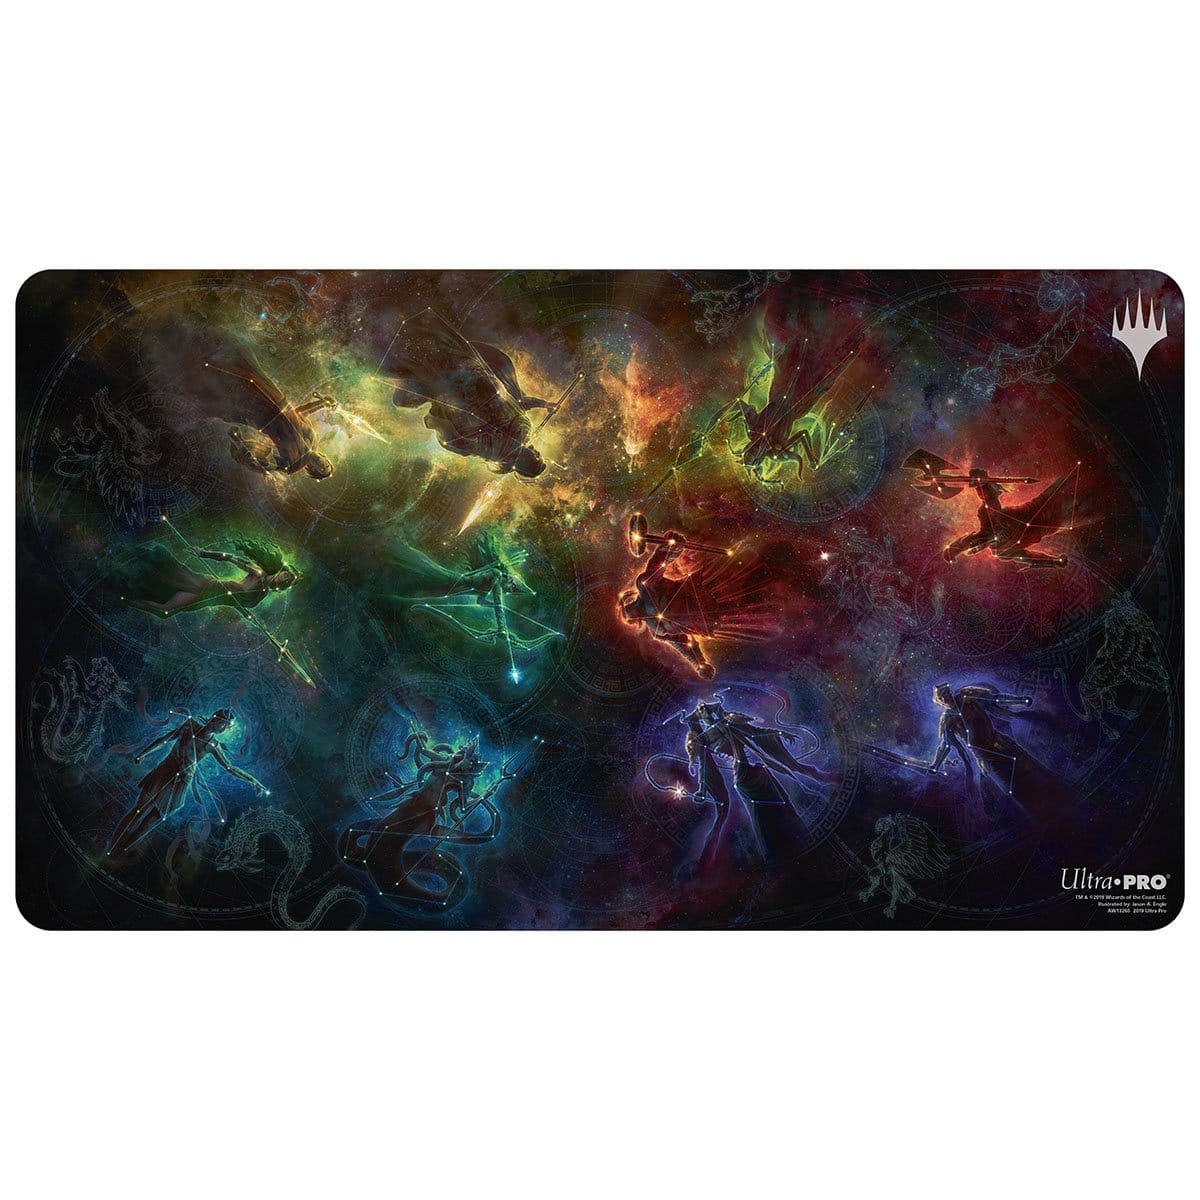 Theros Beyond Death Gods & Demigods Playmat - Playmat - Original Magic Art - Accessories for Magic the Gathering and other card games